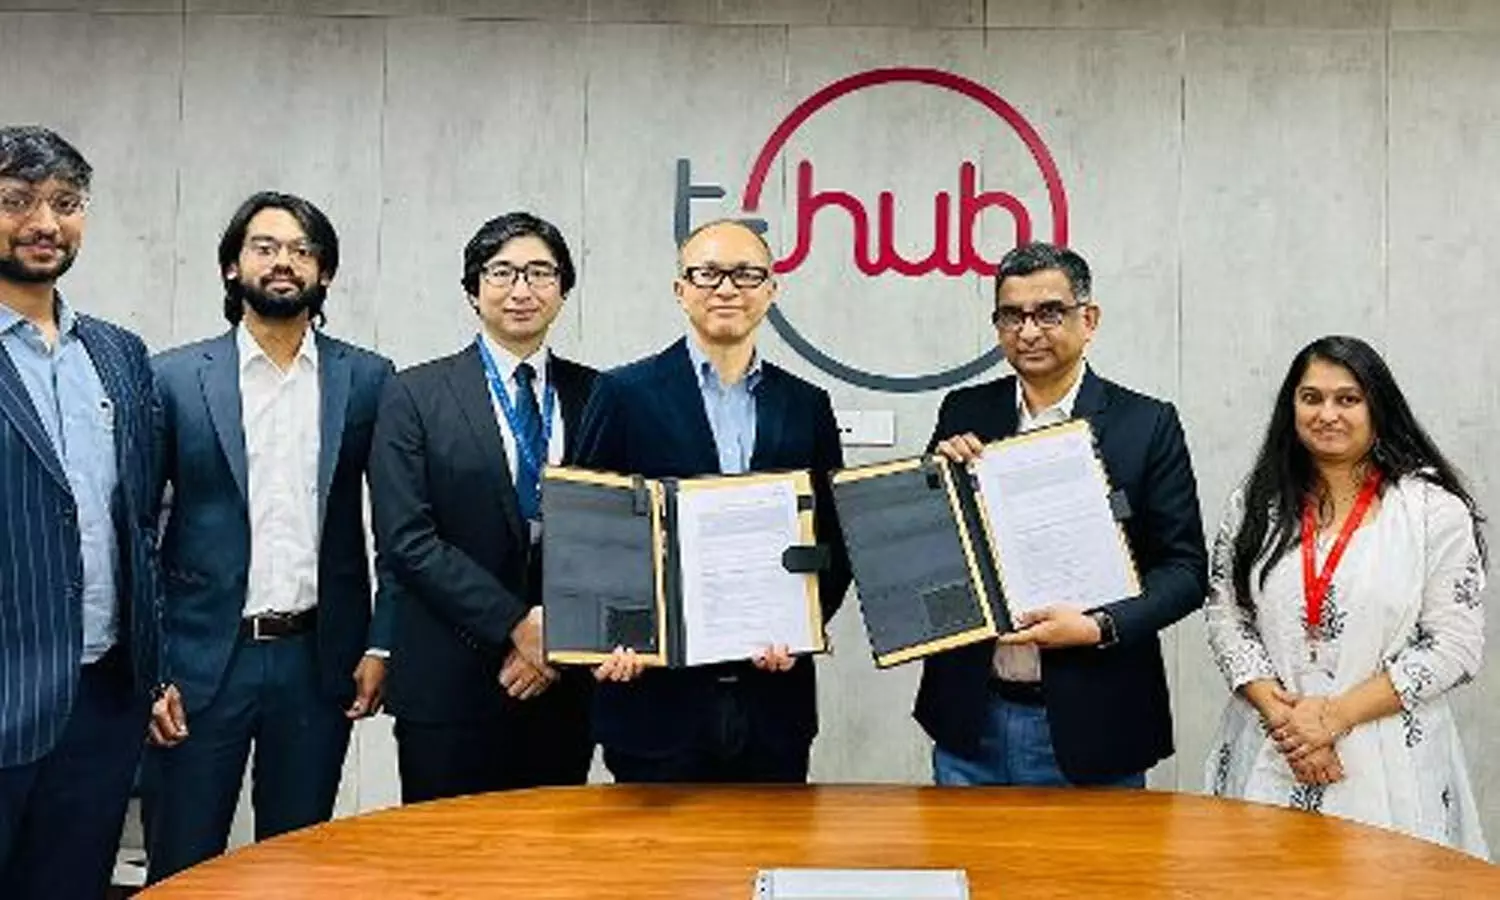 T-Hub, Suzuki Innovation Centre to promote  open-innovation between startups of India, Japan